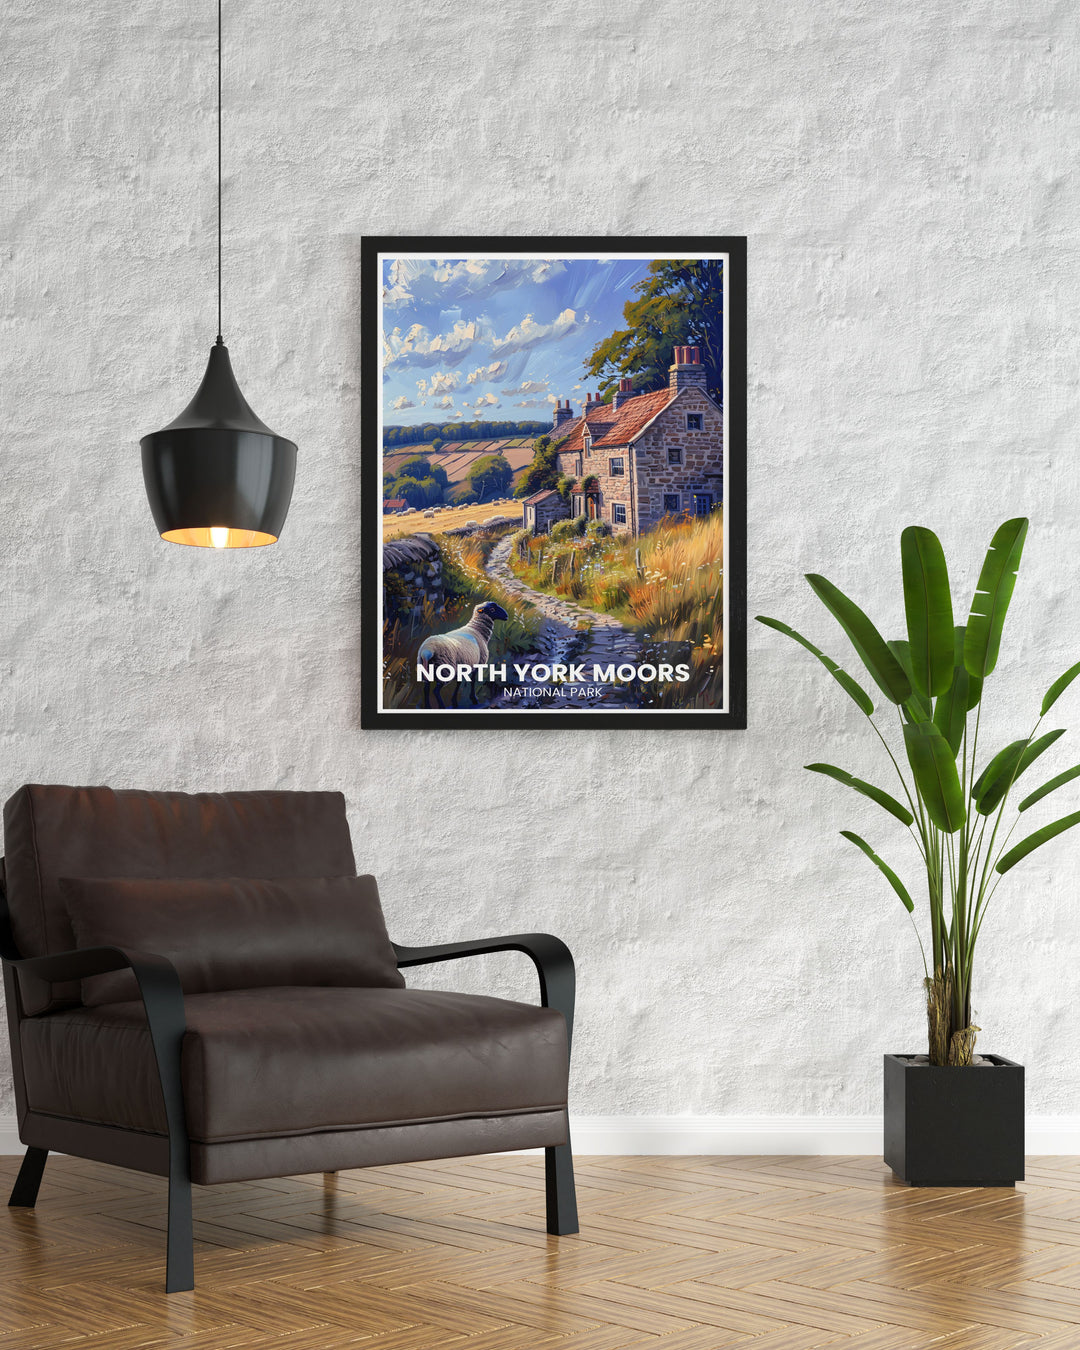 Bring the breathtaking landscapes of North York Moors into your home with this exquisite travel poster, highlighting the rugged beauty and serene vistas of this iconic English national park.